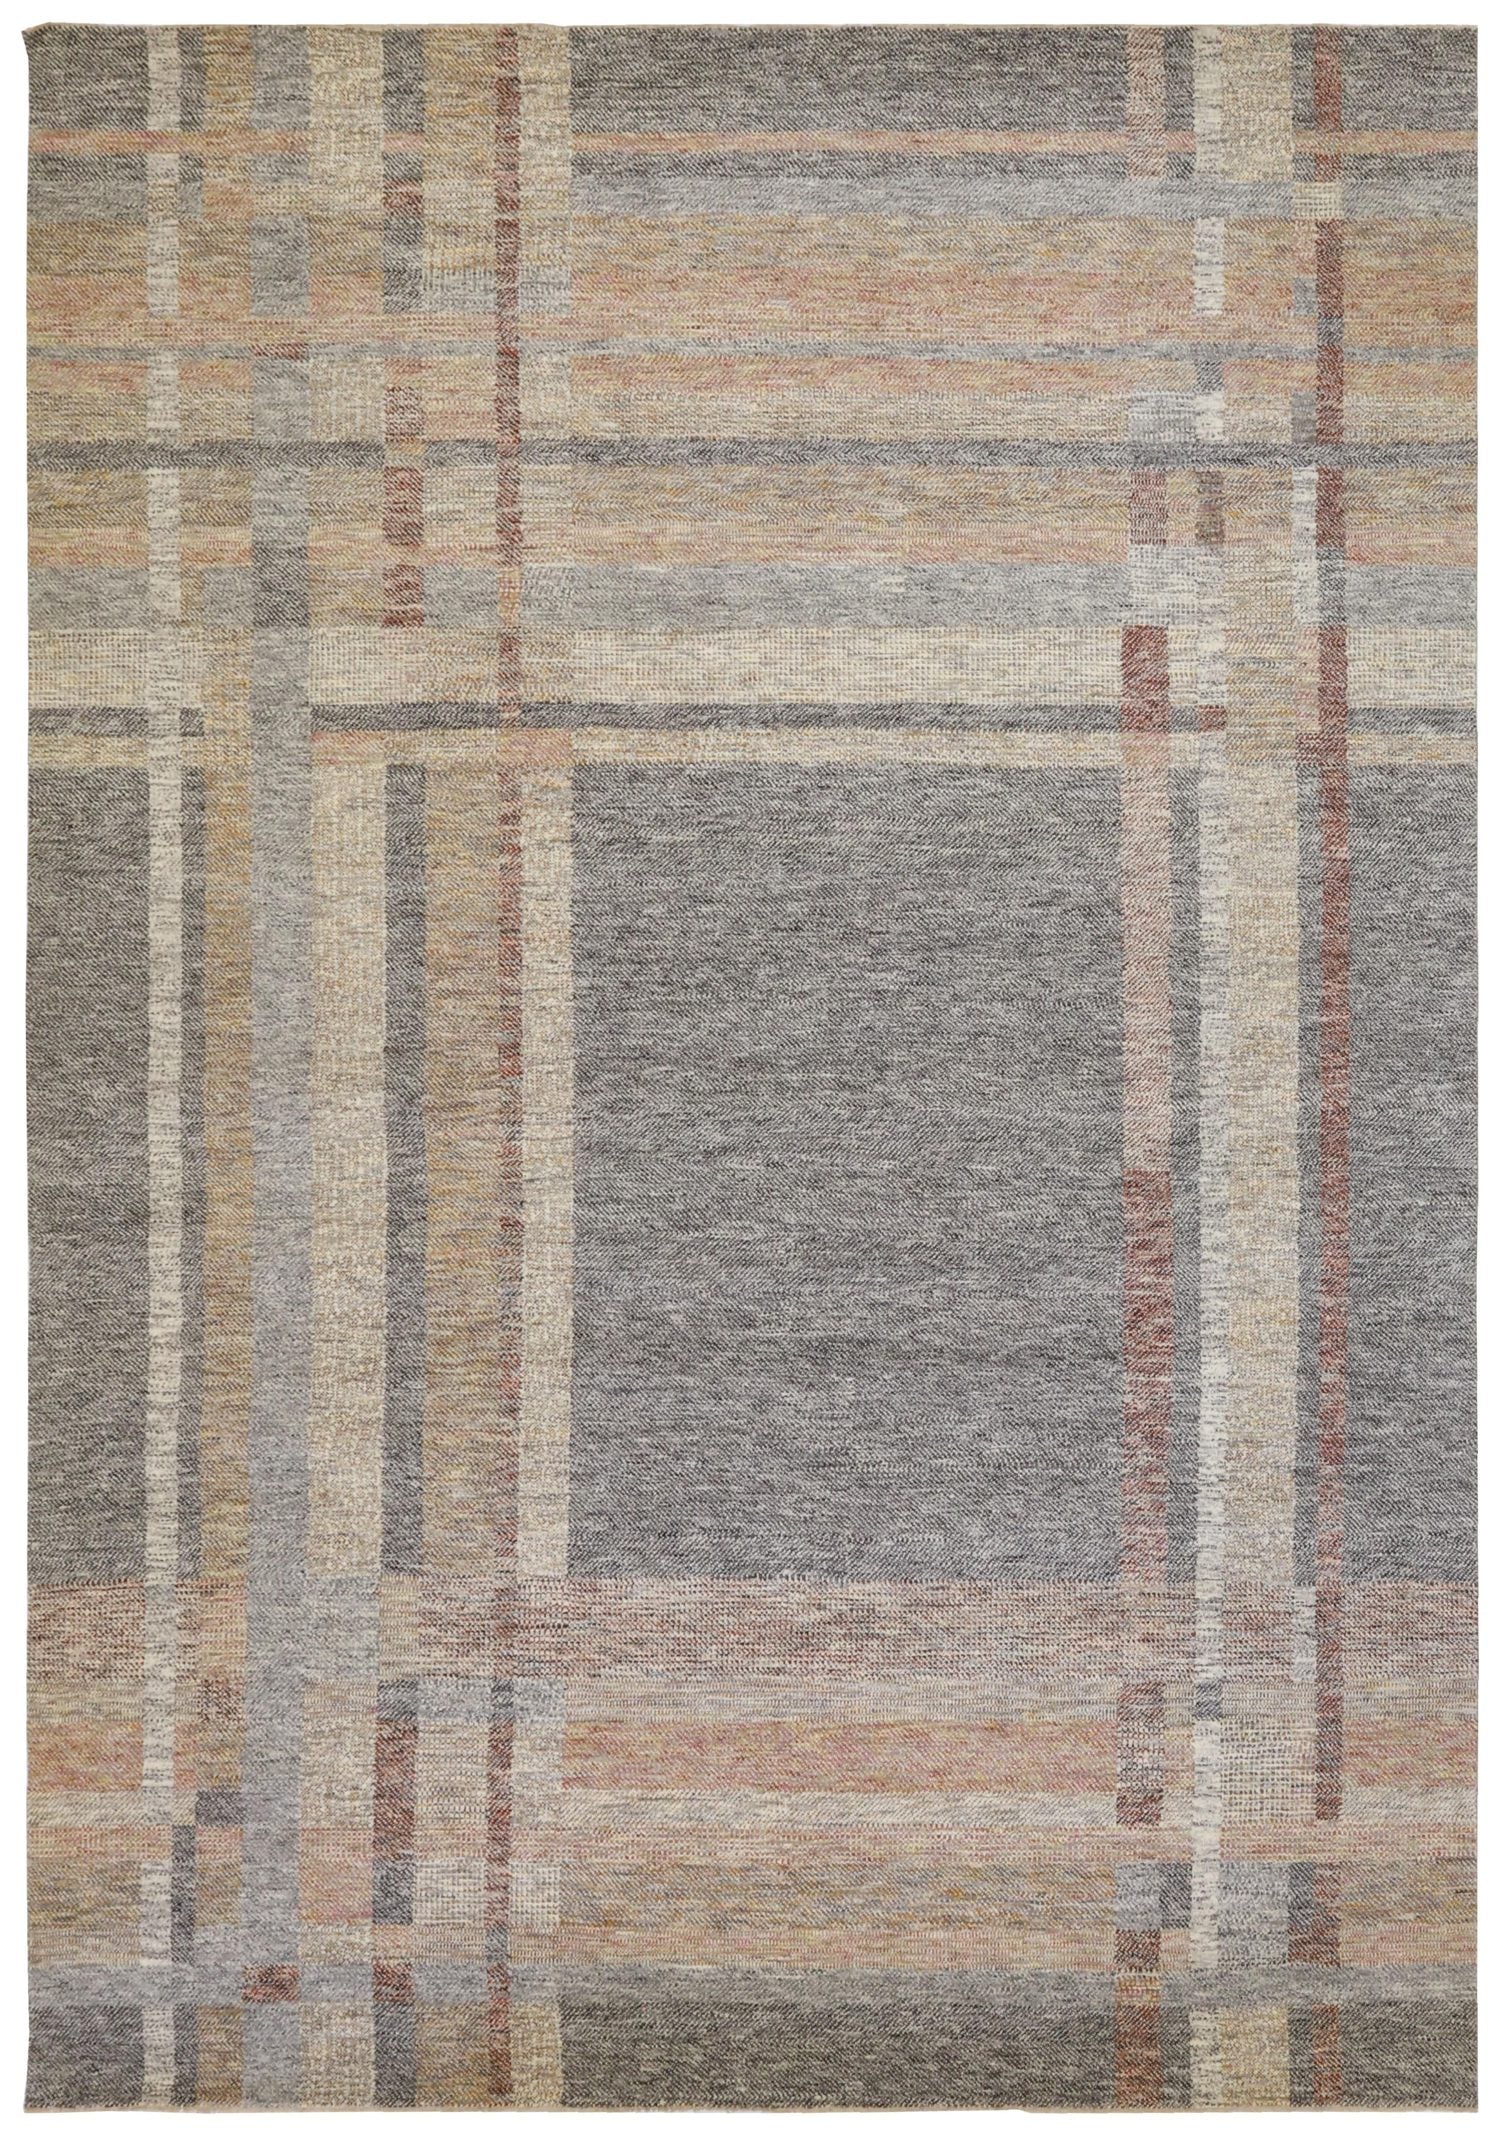 Gingham Handwoven Contemporary Rug